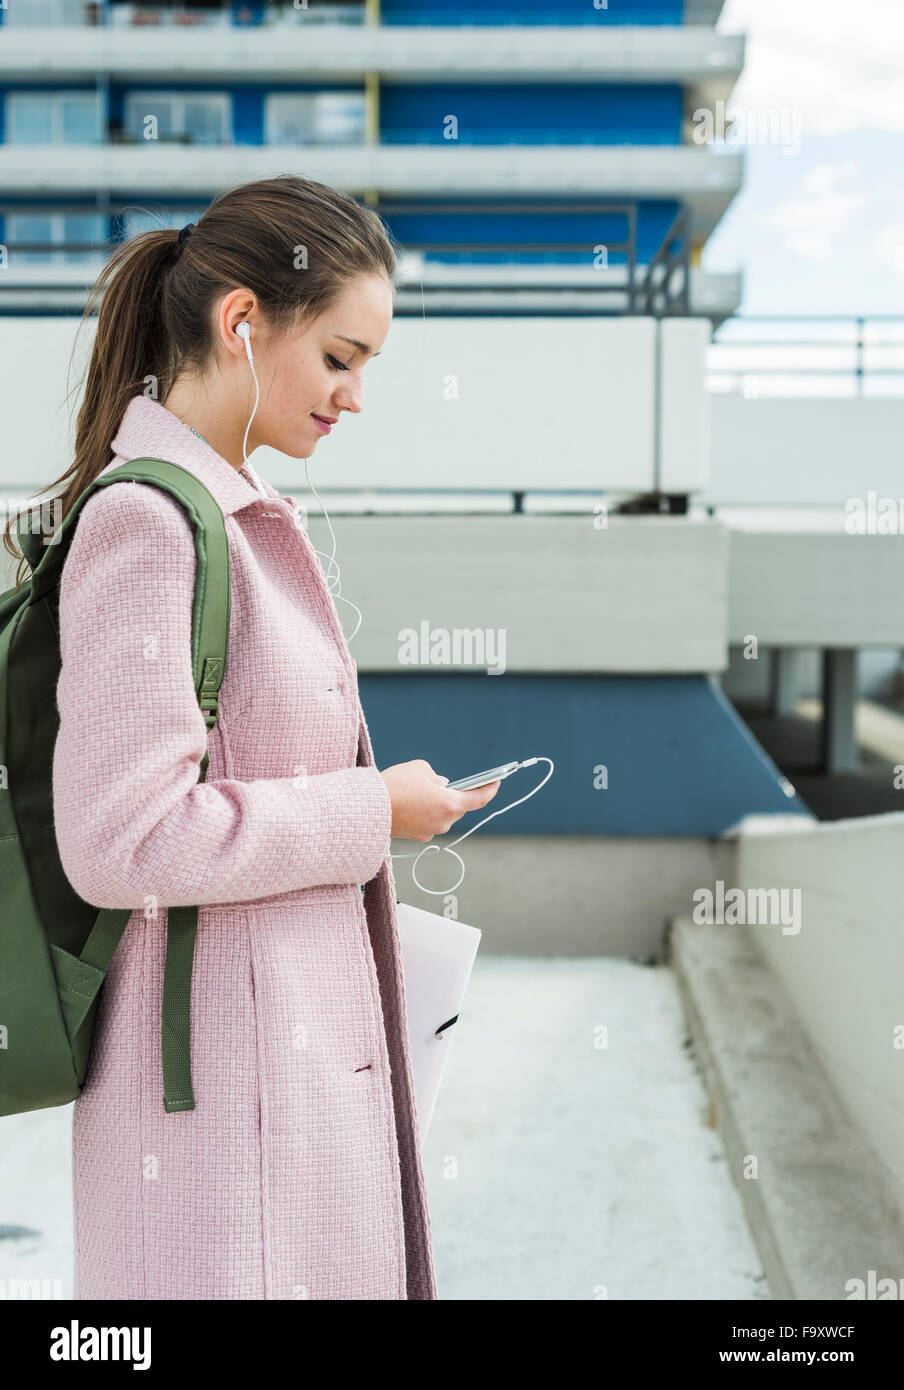 Young woman with earbuds looking at cell phone Stock Photo